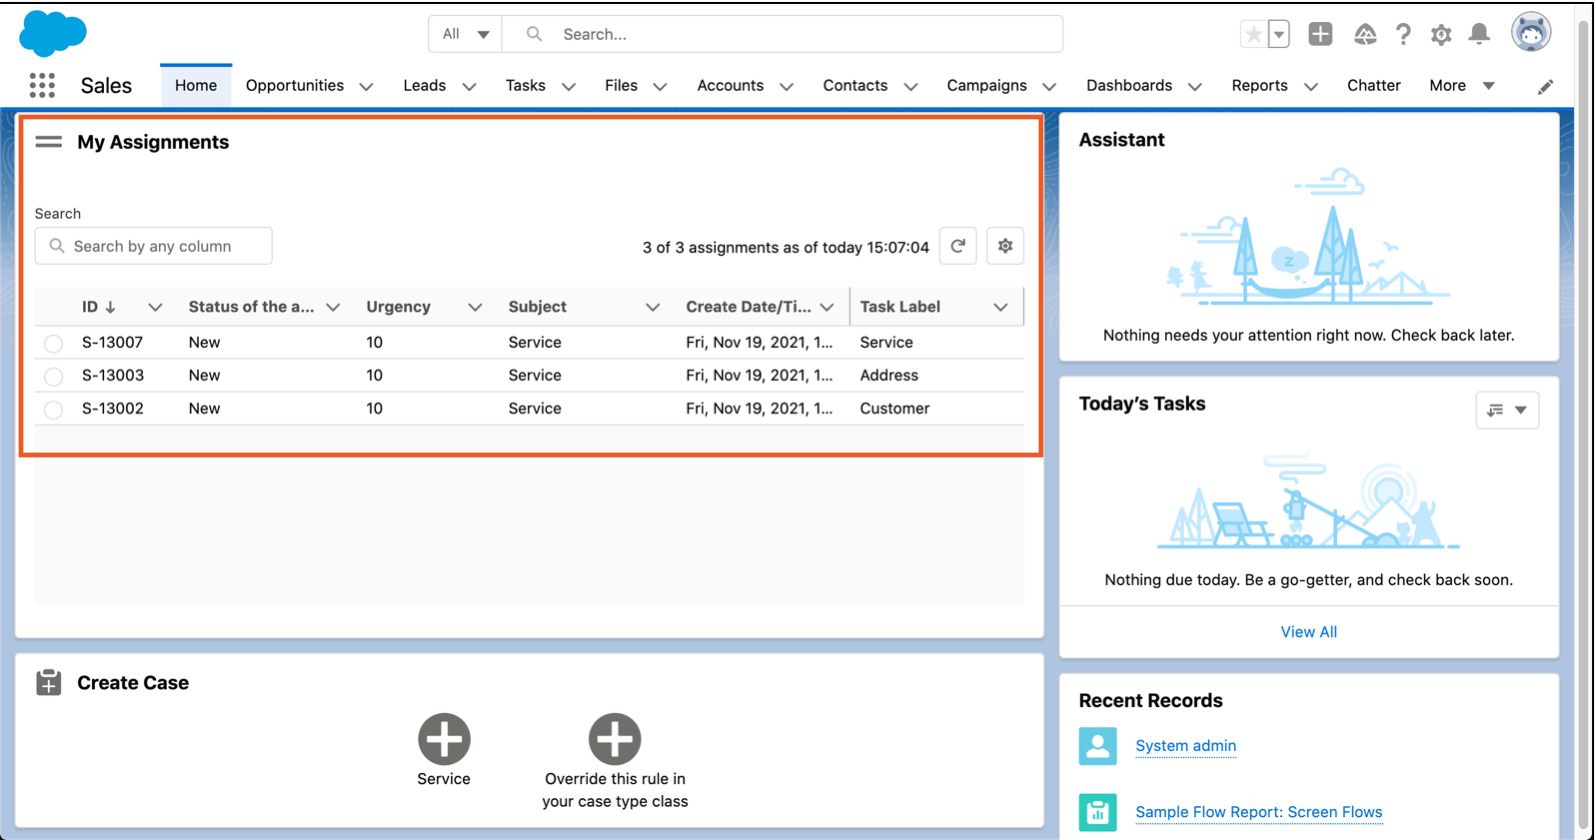 Figure showing the Home screen in Salesforce Lightning with the Assignments section highlighted